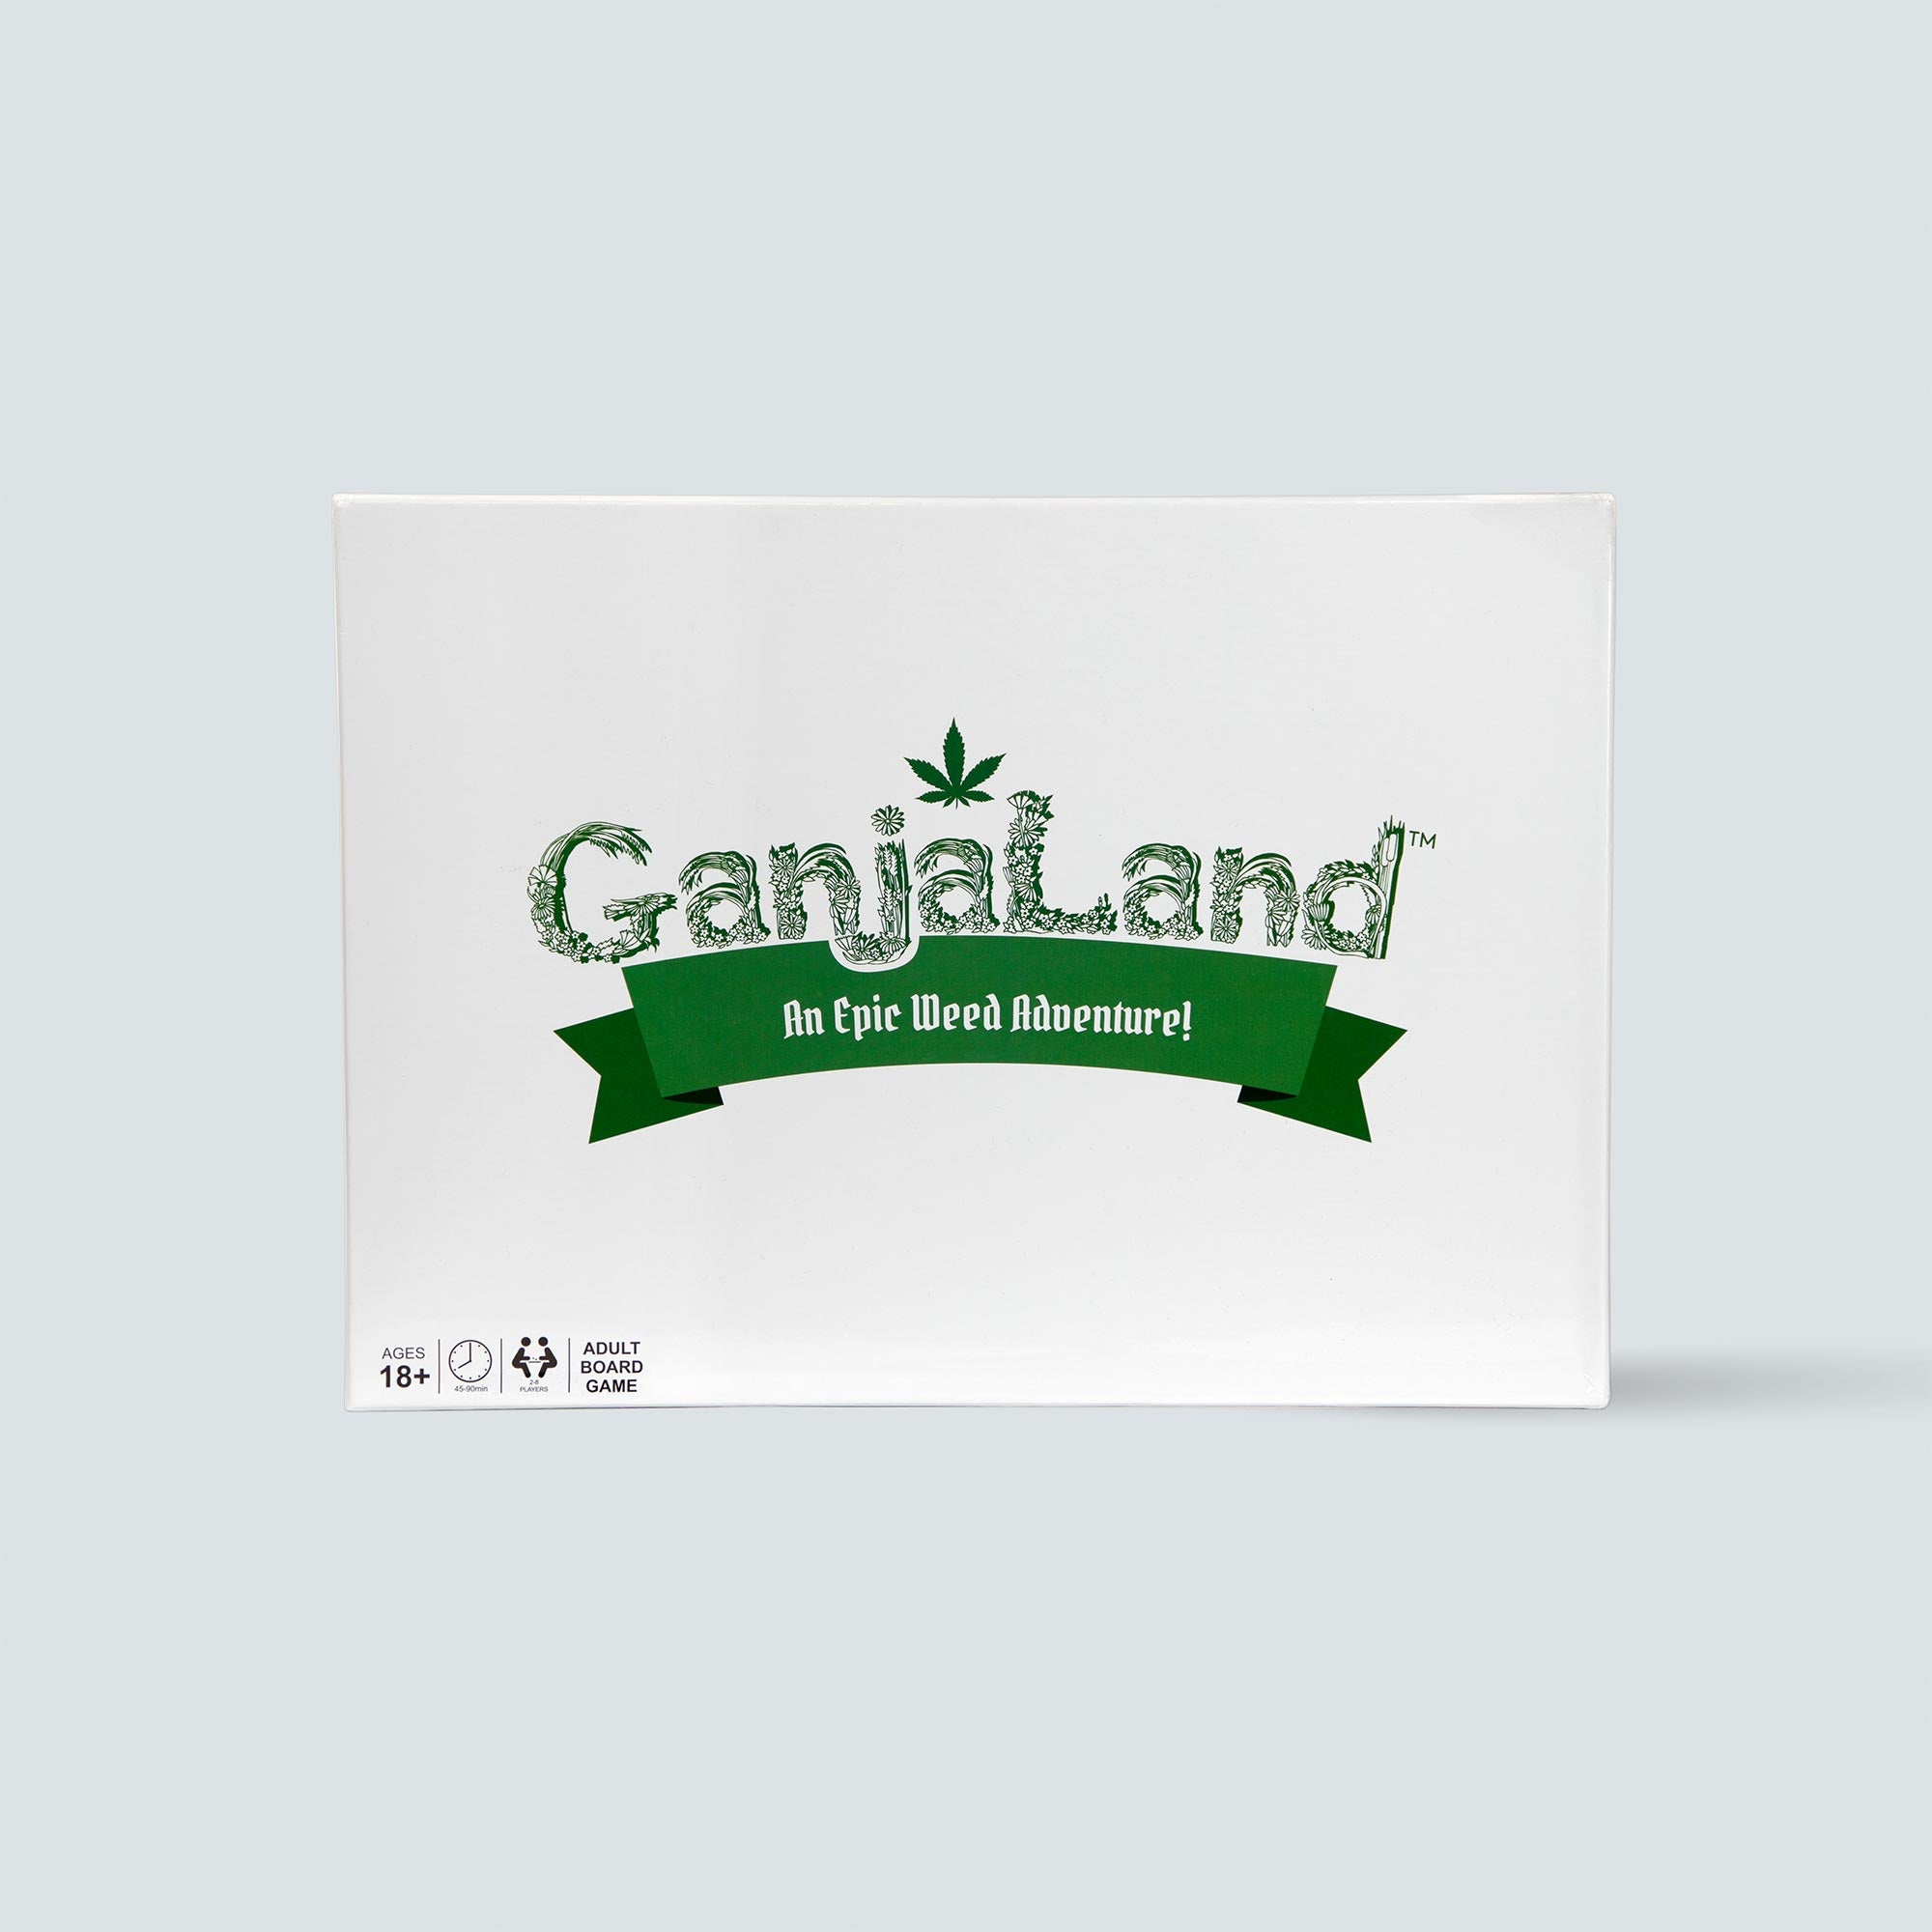 ganjaland-game-box-and-game-play-03-what-do-you-meme-by-relatable